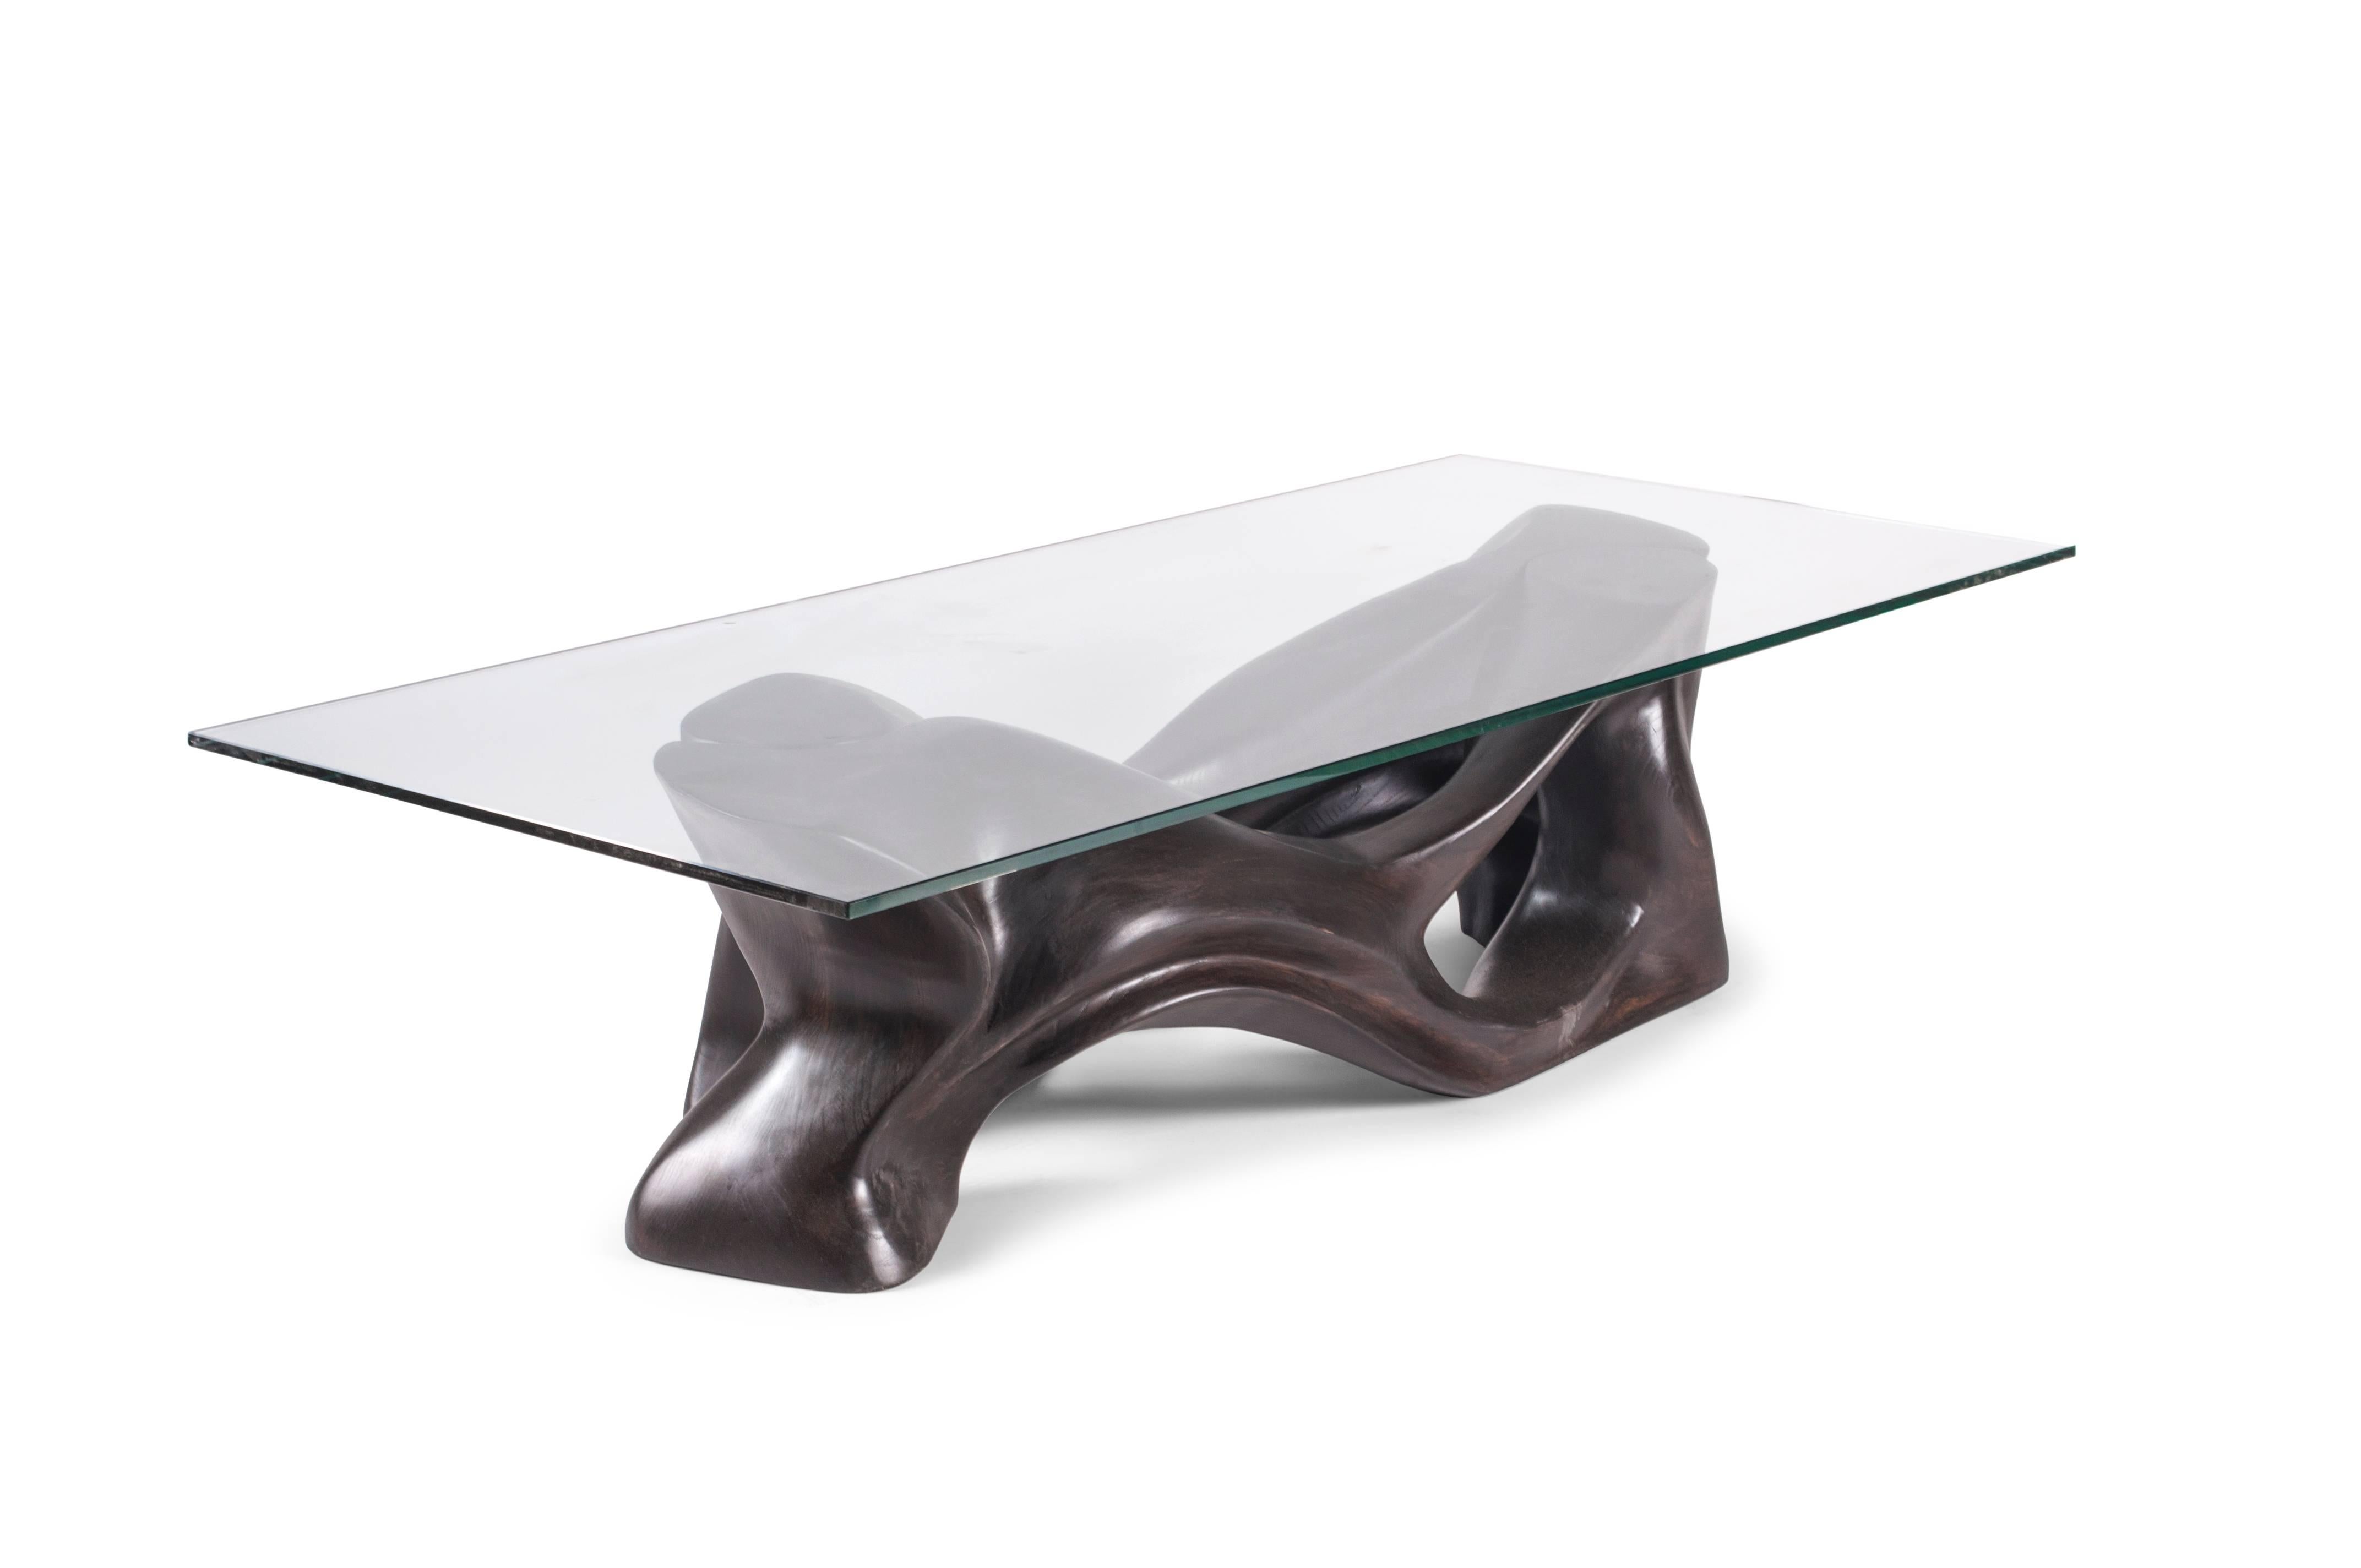 American Amorph Crux Modern Coffee Table, Ebony stain in Ash wood with rectangular glass  For Sale